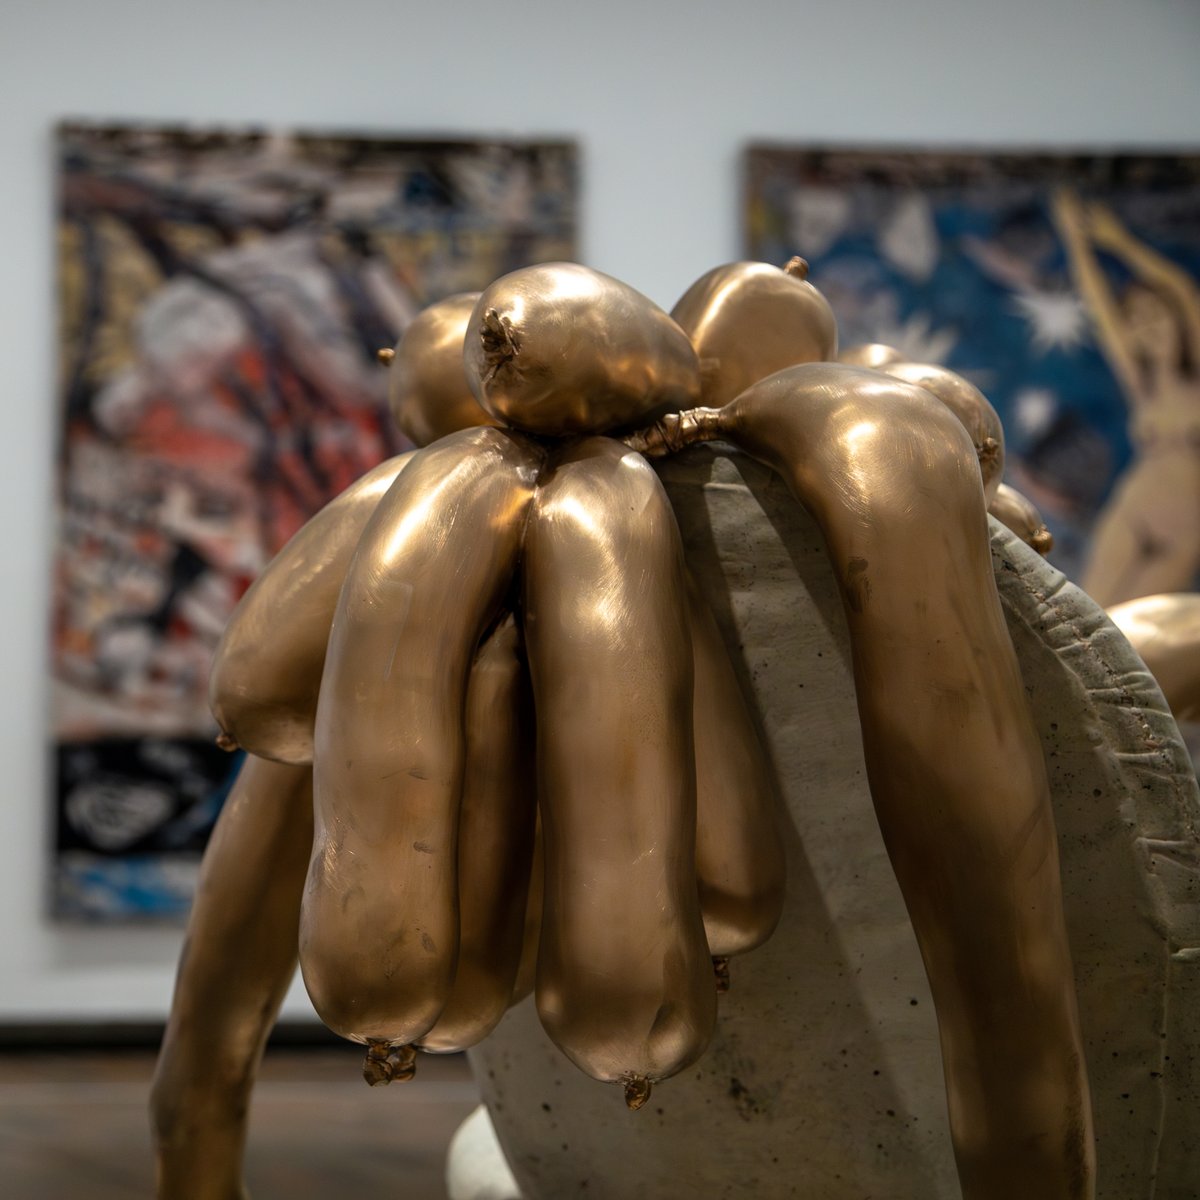 Deep Inside My Heart must close 19 May. This exhibition focuses on major women artists of the 20th century, featuring works like TITTIPUSSIDAD by Sarah Lucas. Deep Inside My Heart, Free until 19 May. nga.gov.au/exhibitions/de… #DeepInsideMyHeart #SarahLucas #NationalGalleryAU